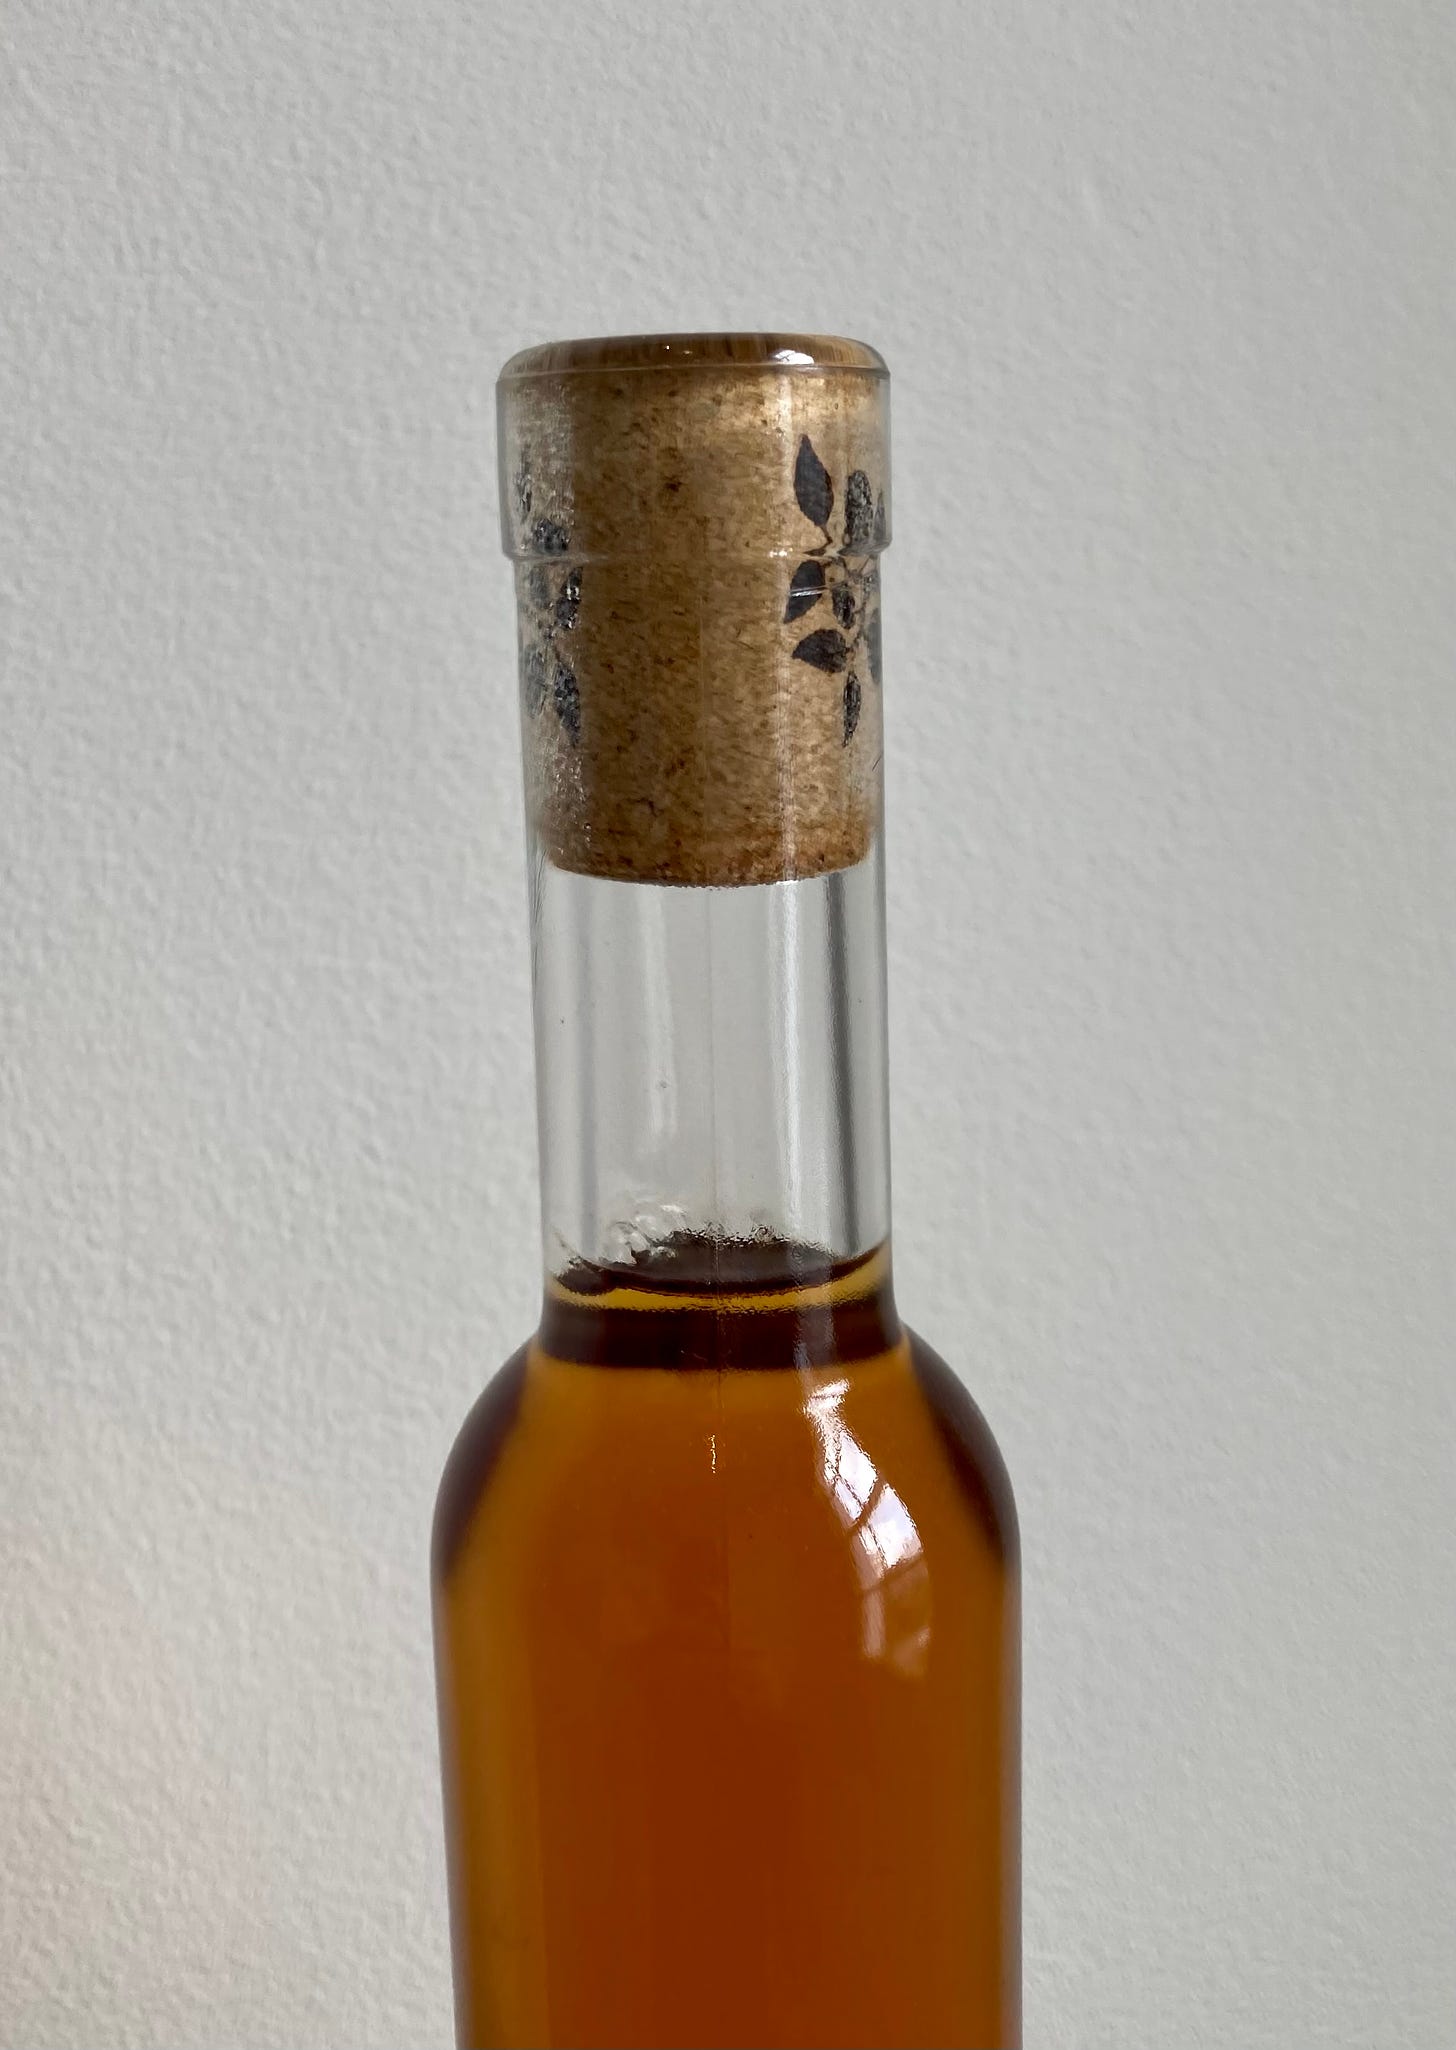 A bottle with a cork closure and no capsule, which shows a design added to the cork rather than on a capsule.